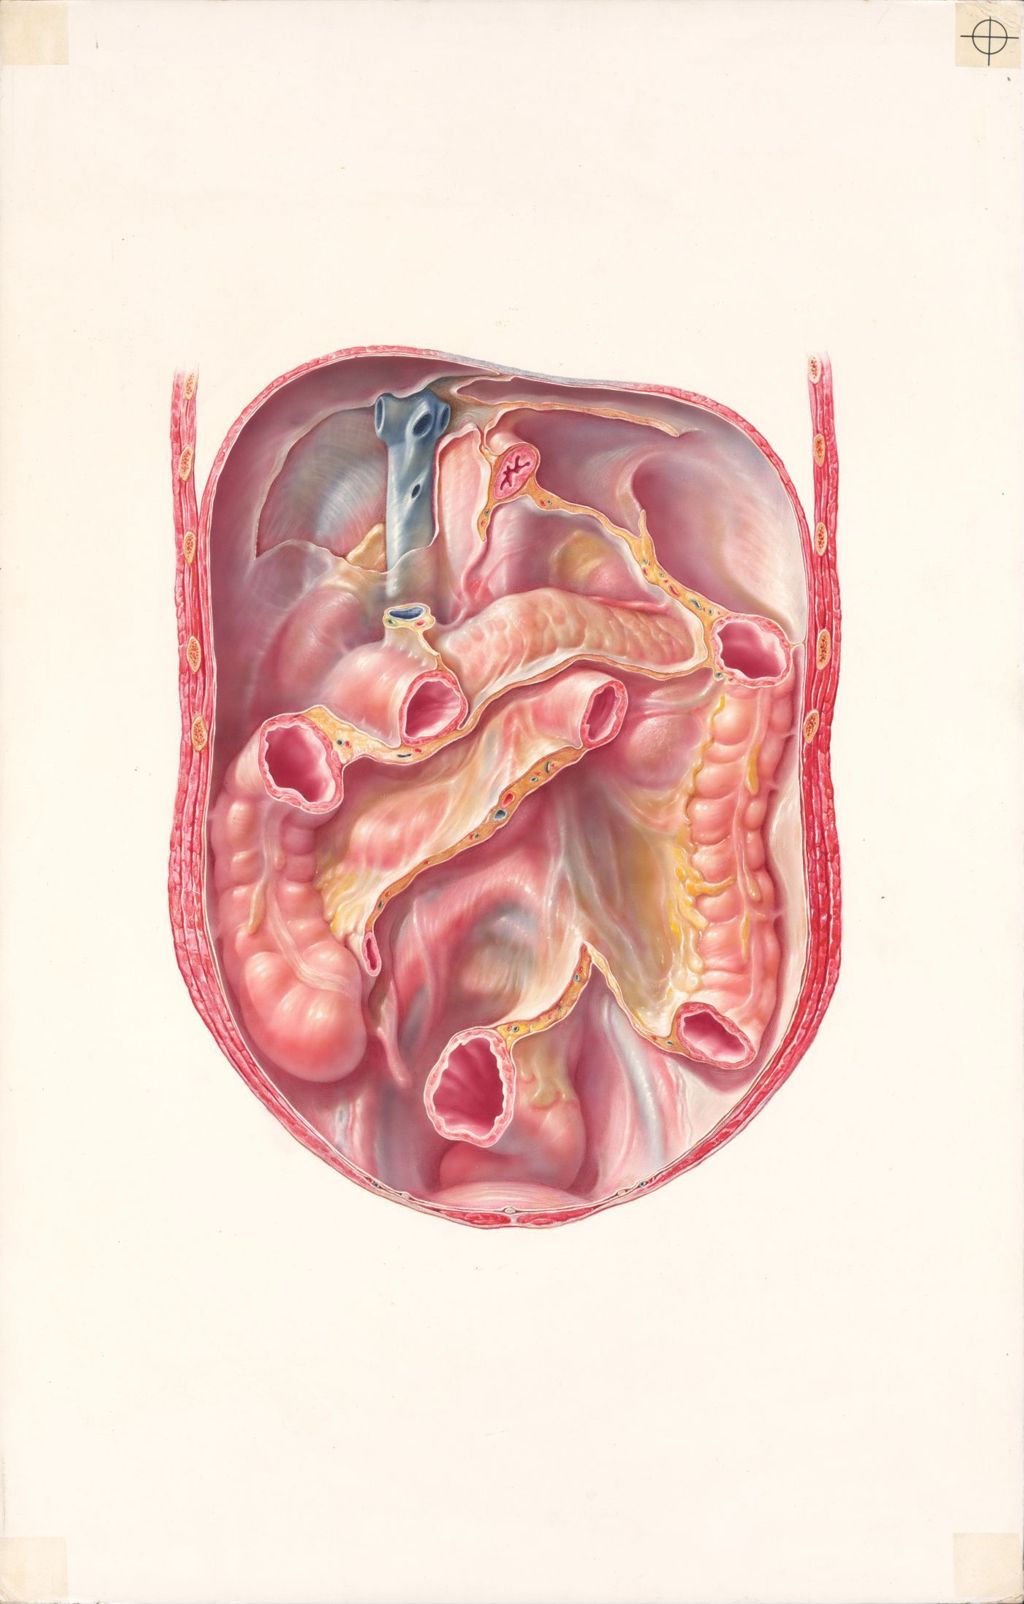 Medical Profiles, The Anatomical Disposition of the Peritoneum, Plate II, The Posterior Abdominal Wall, Showing the Lines of Peritoneal Reflection